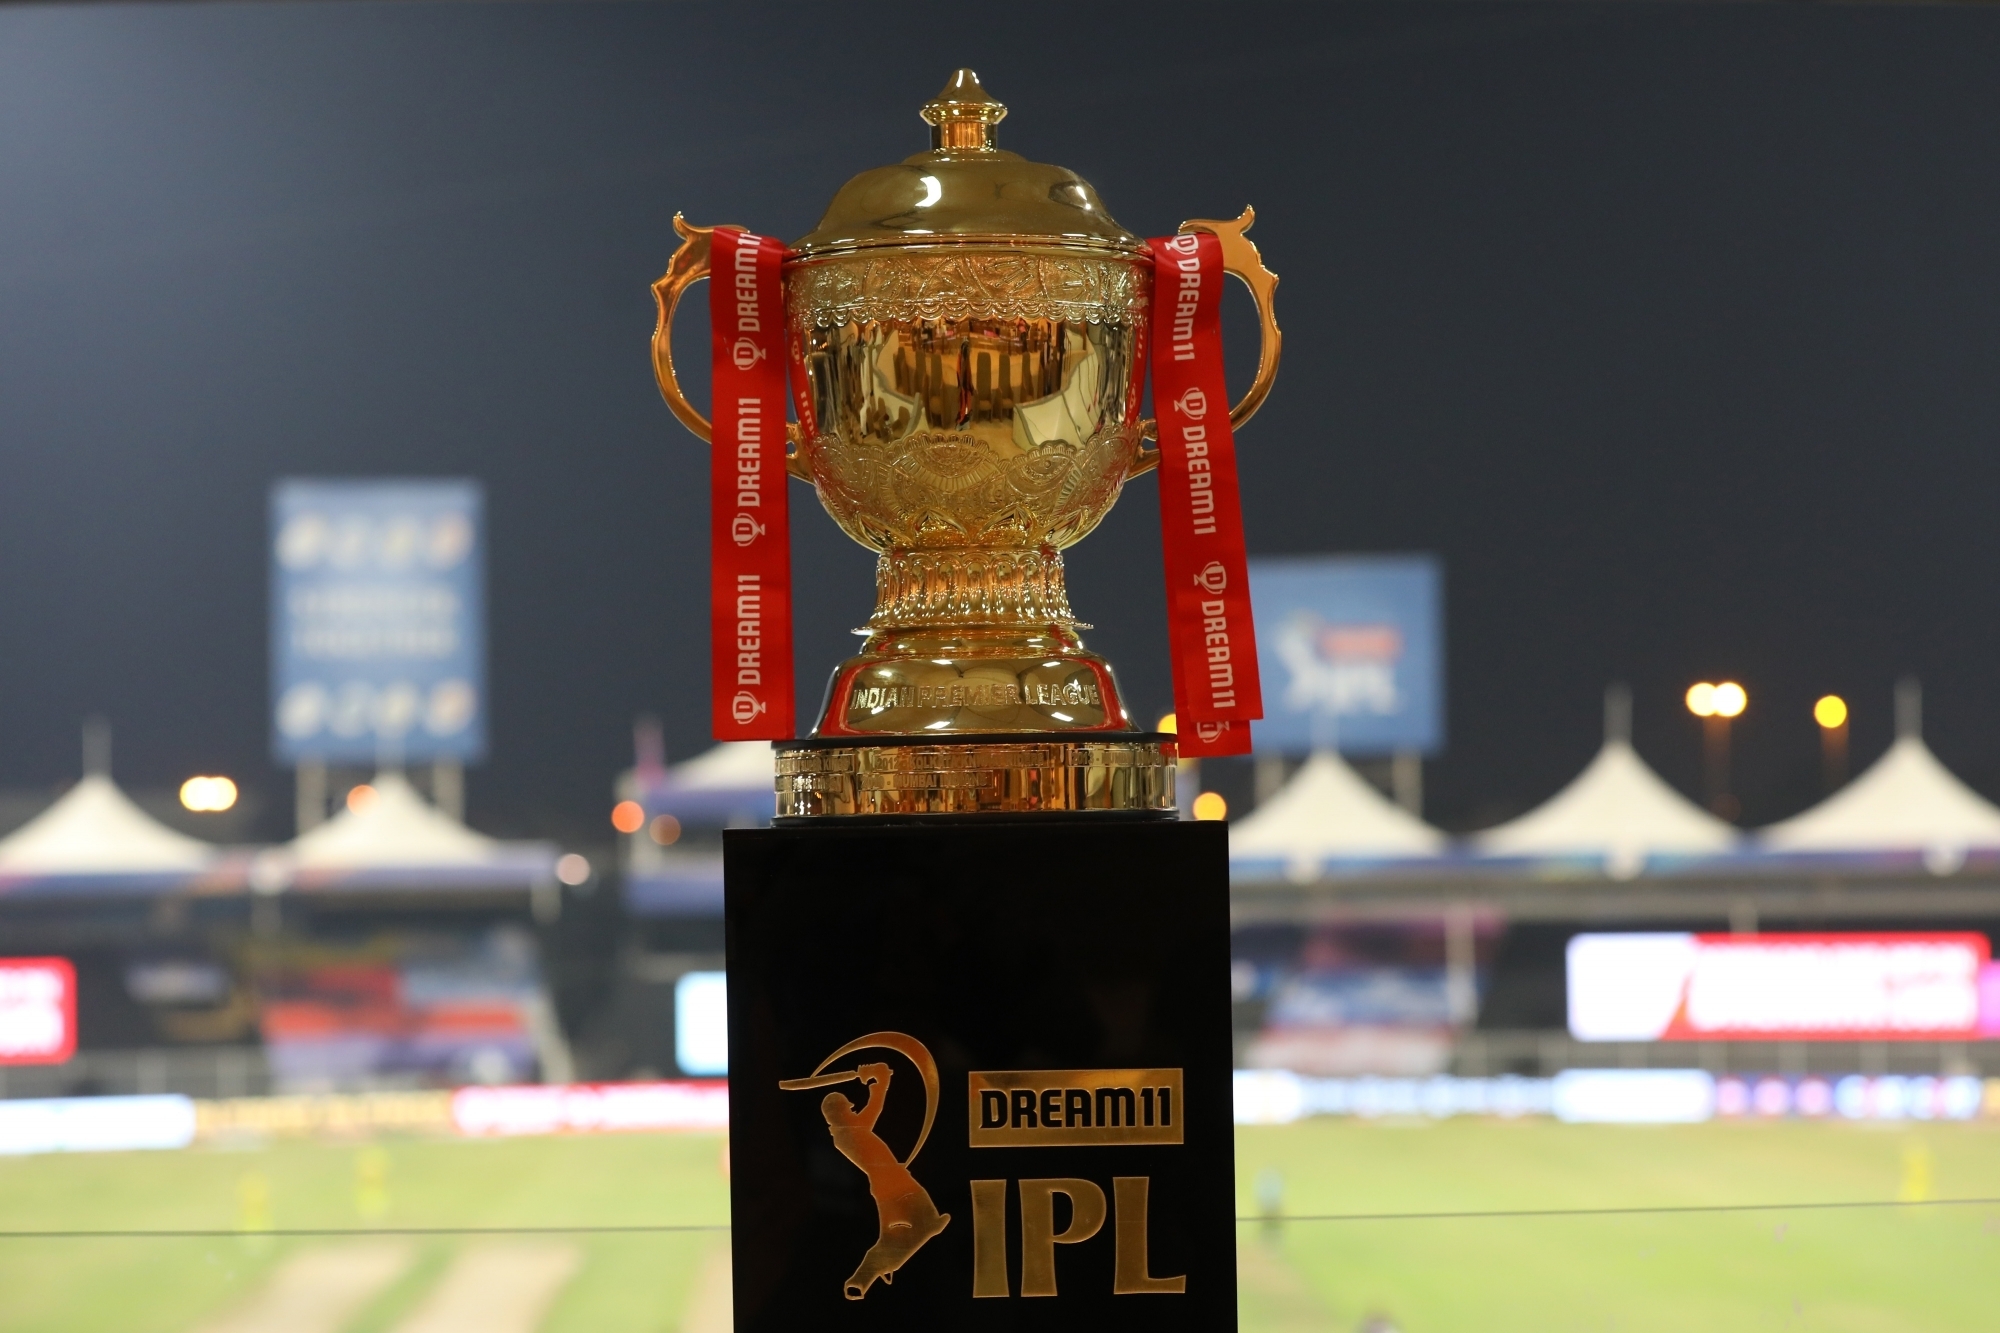 IPL 2020 is being played in the UAE | BCCI/IPL